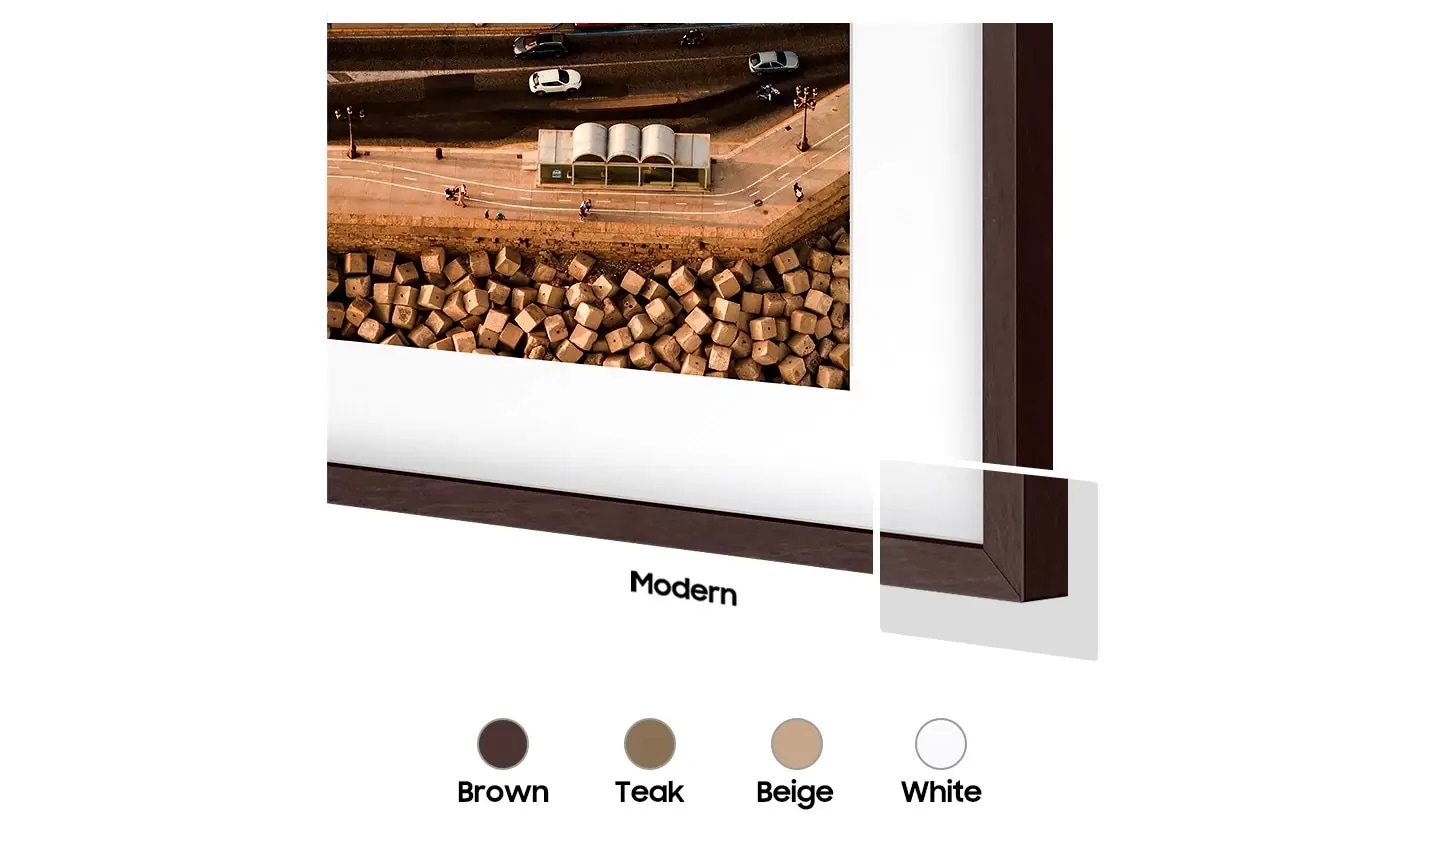 Modern bezel offer users a choice of contemporary style. Colour chips for Brown, Teak, White are shown.